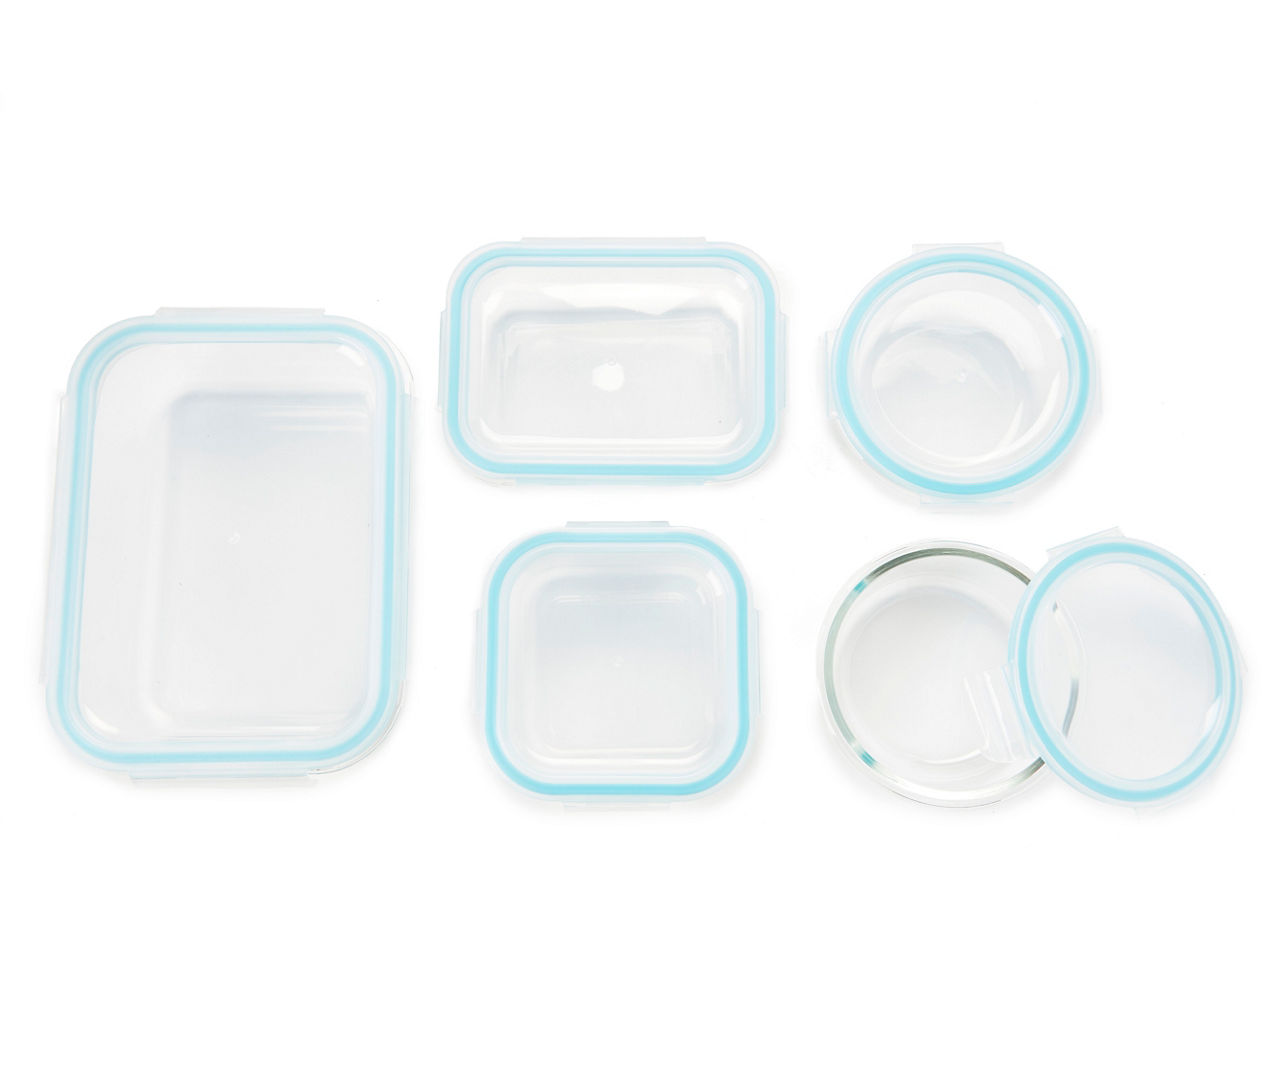 Glass Food Storage Containers 10 PC - White